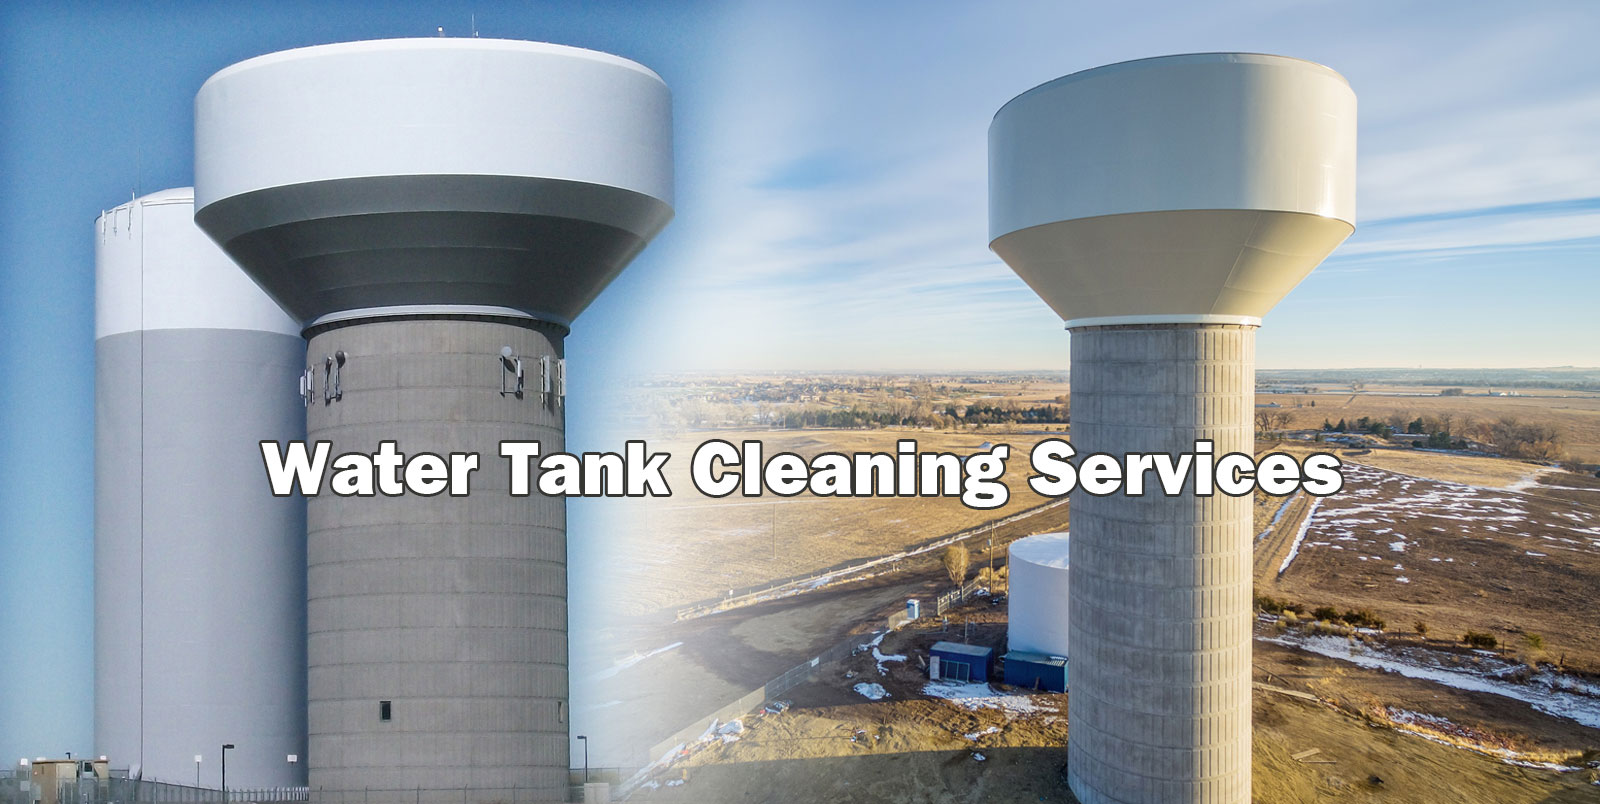 Tank Cleaning @Max Cleaner